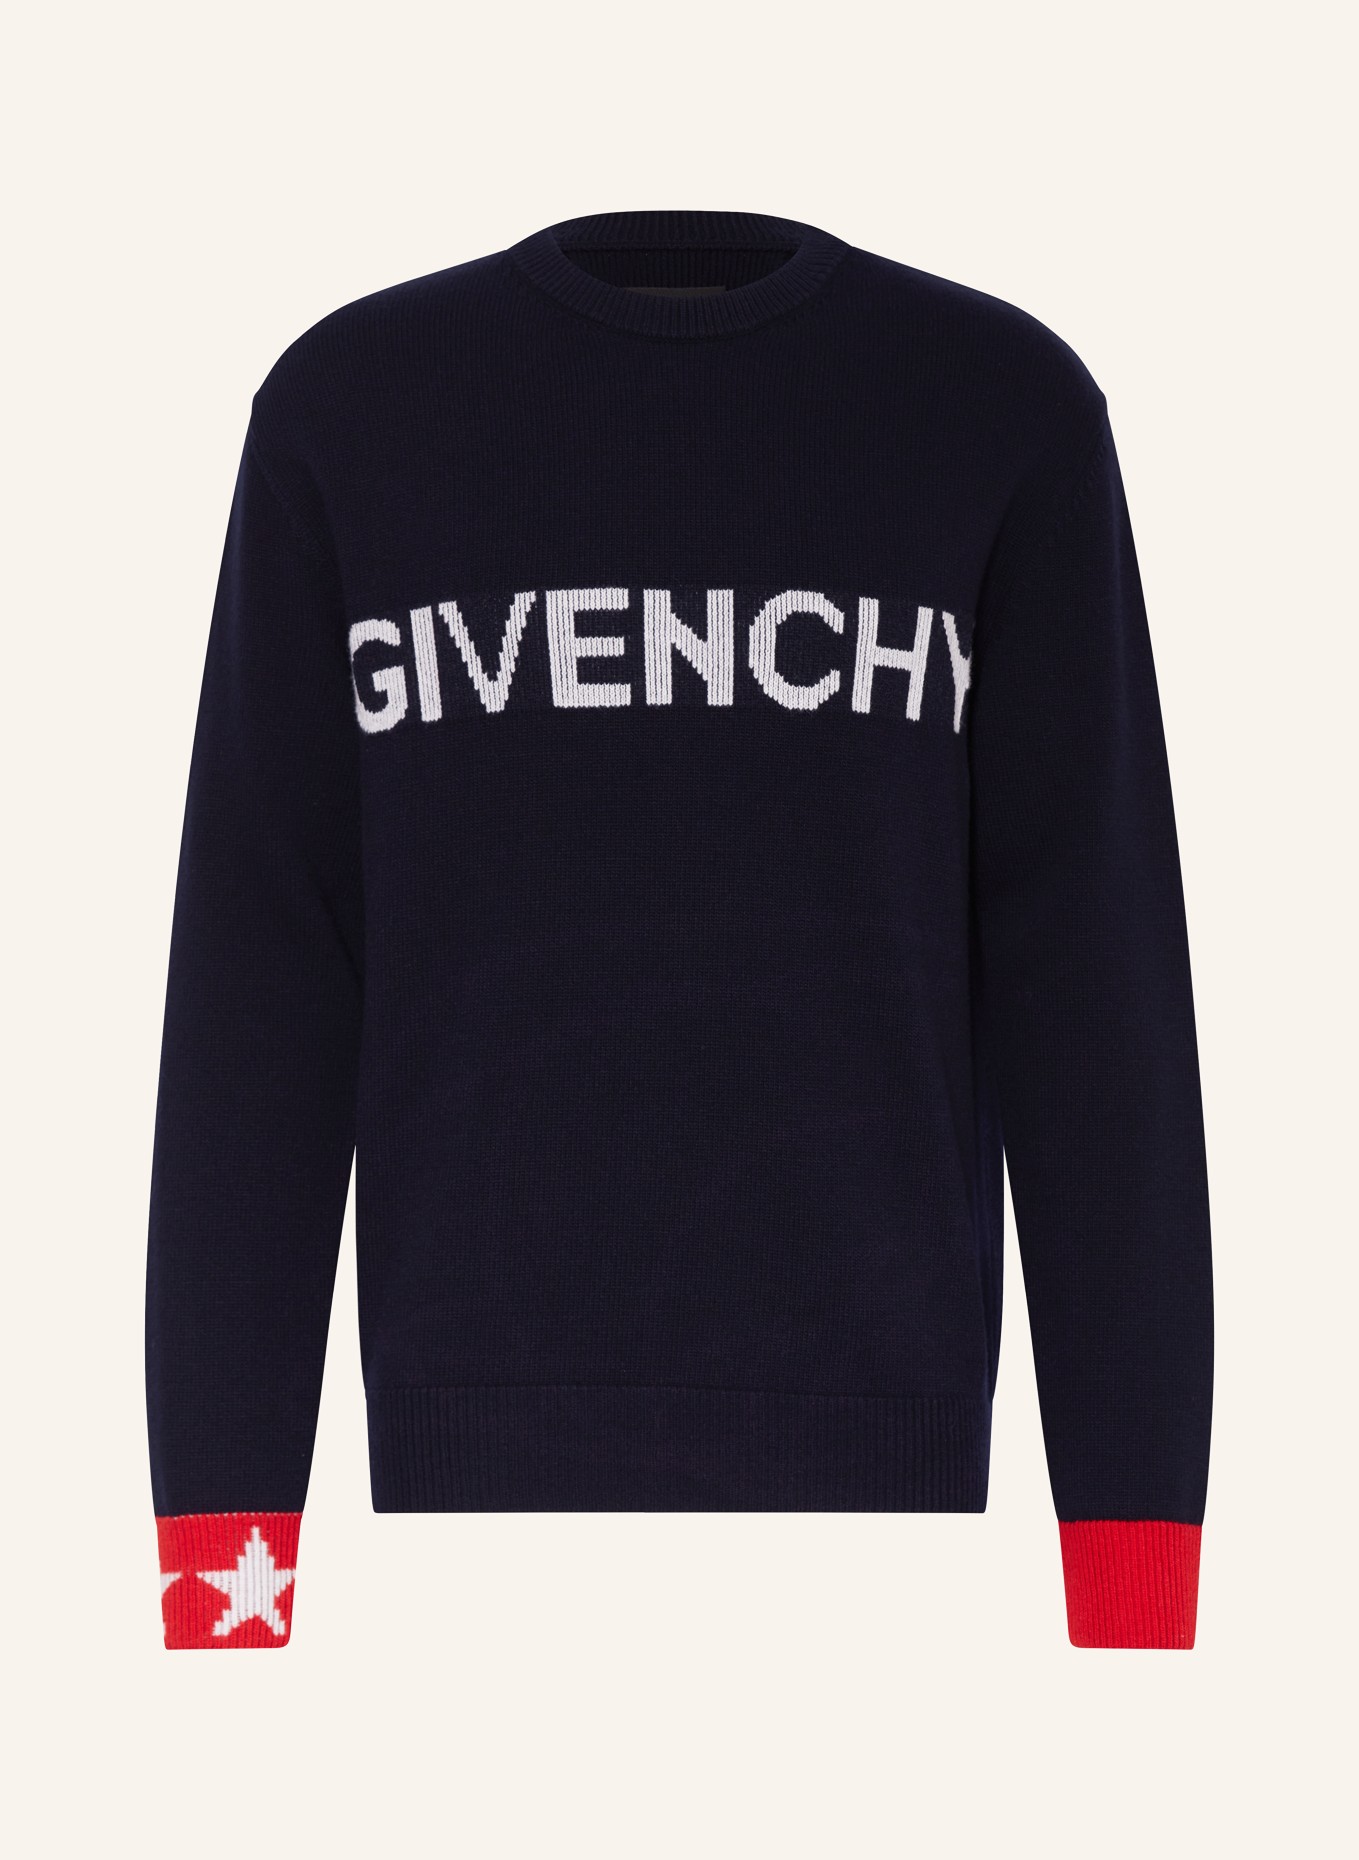 GIVENCHY Pullover, Farbe: DUNKELBLAU/ WEISS/ ROT (Bild 1)